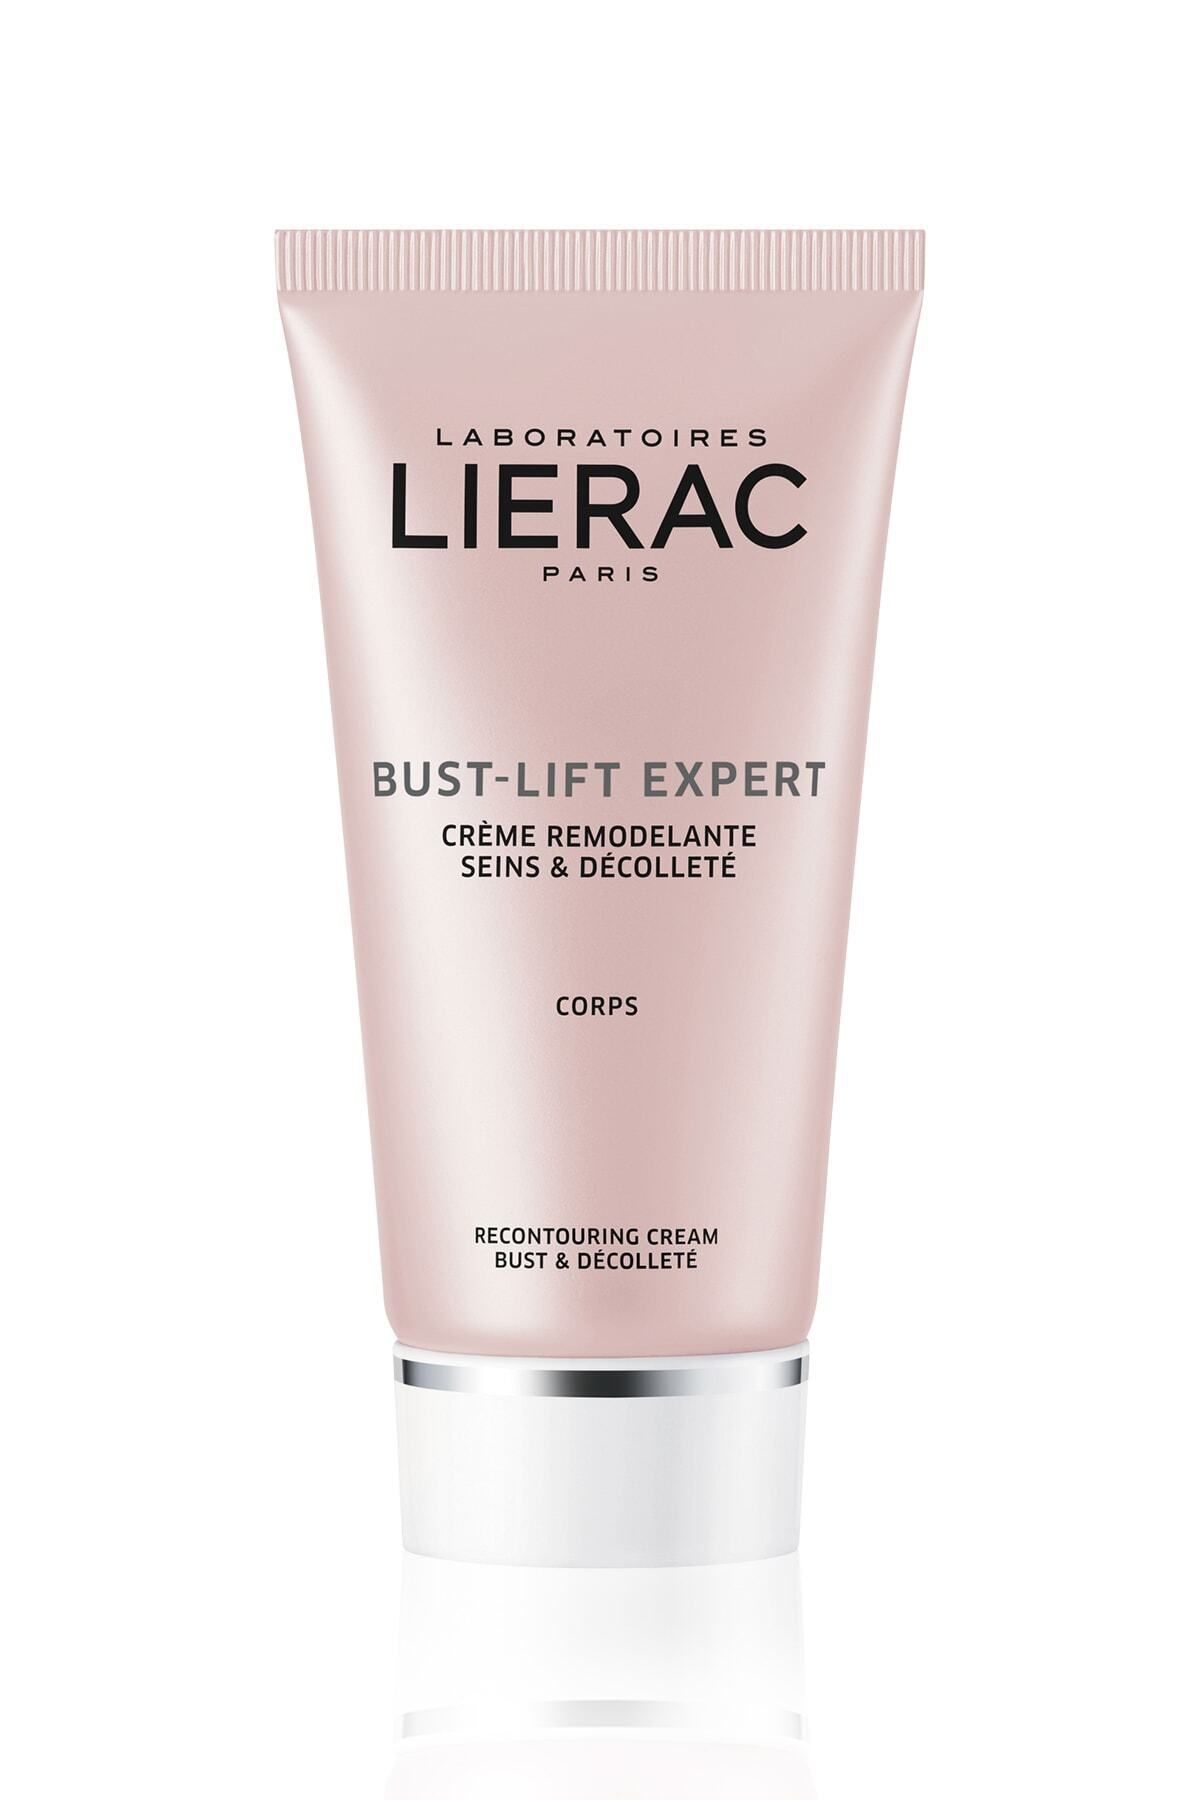 Lierac SKİN BRİGHTENİNG BUST-LİFT EXPERT CARE CREAM FOR CHEST AND DÉCOLLETÉ AREA 75 ML. DEMBA2945